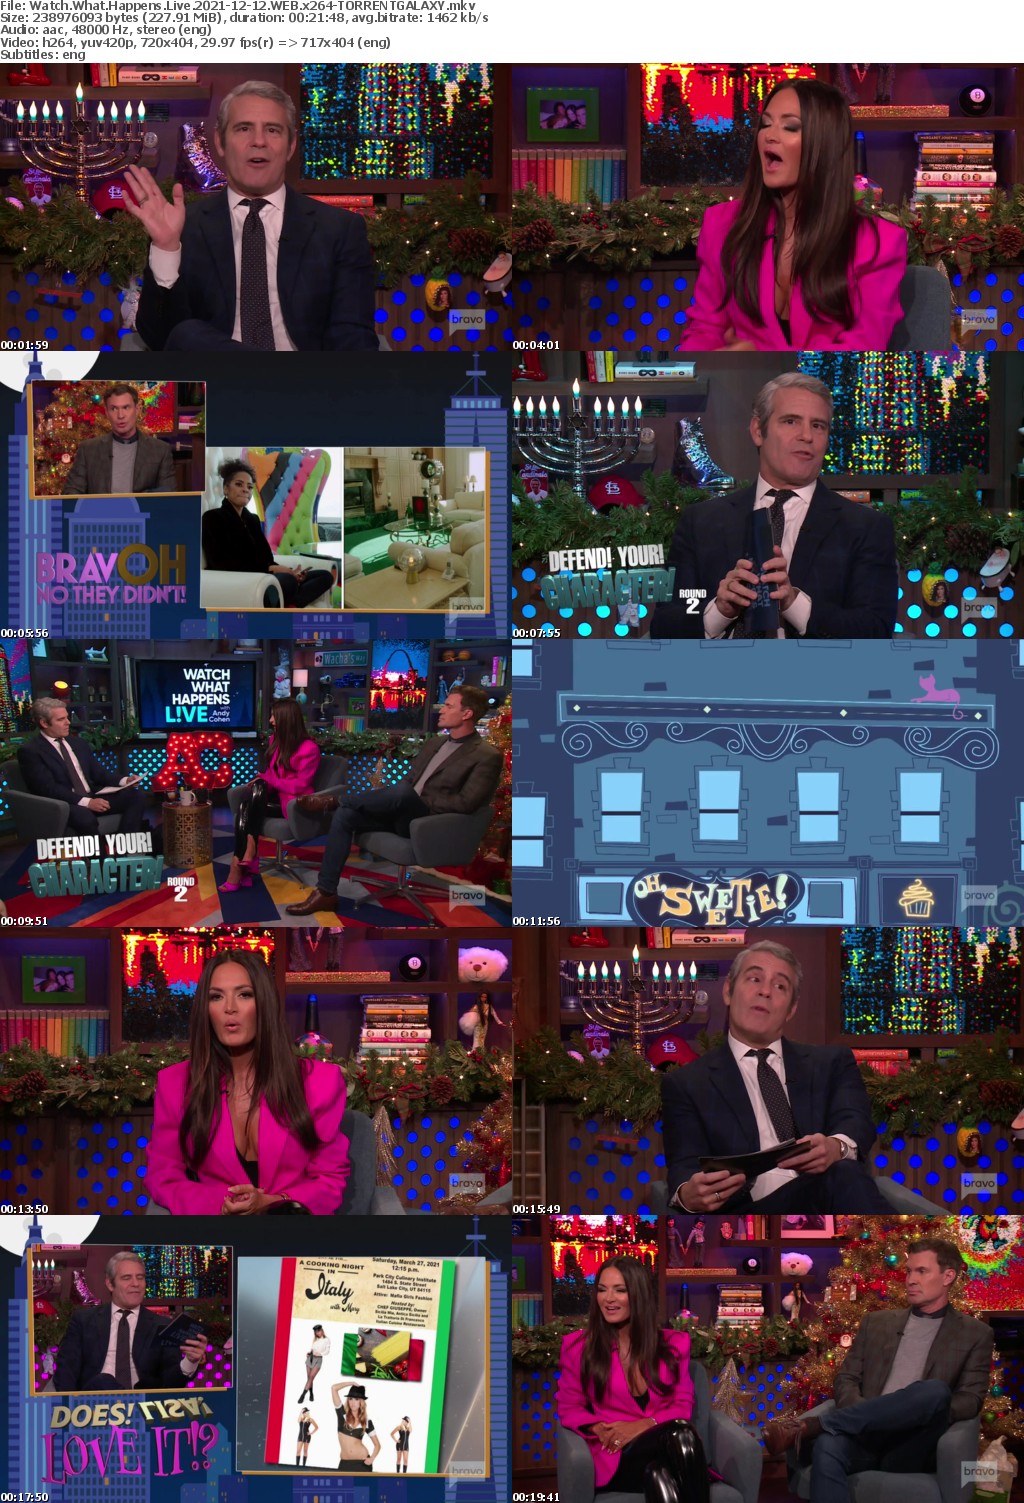 Watch What Happens Live 2021-12-12 WEB x264-GALAXY